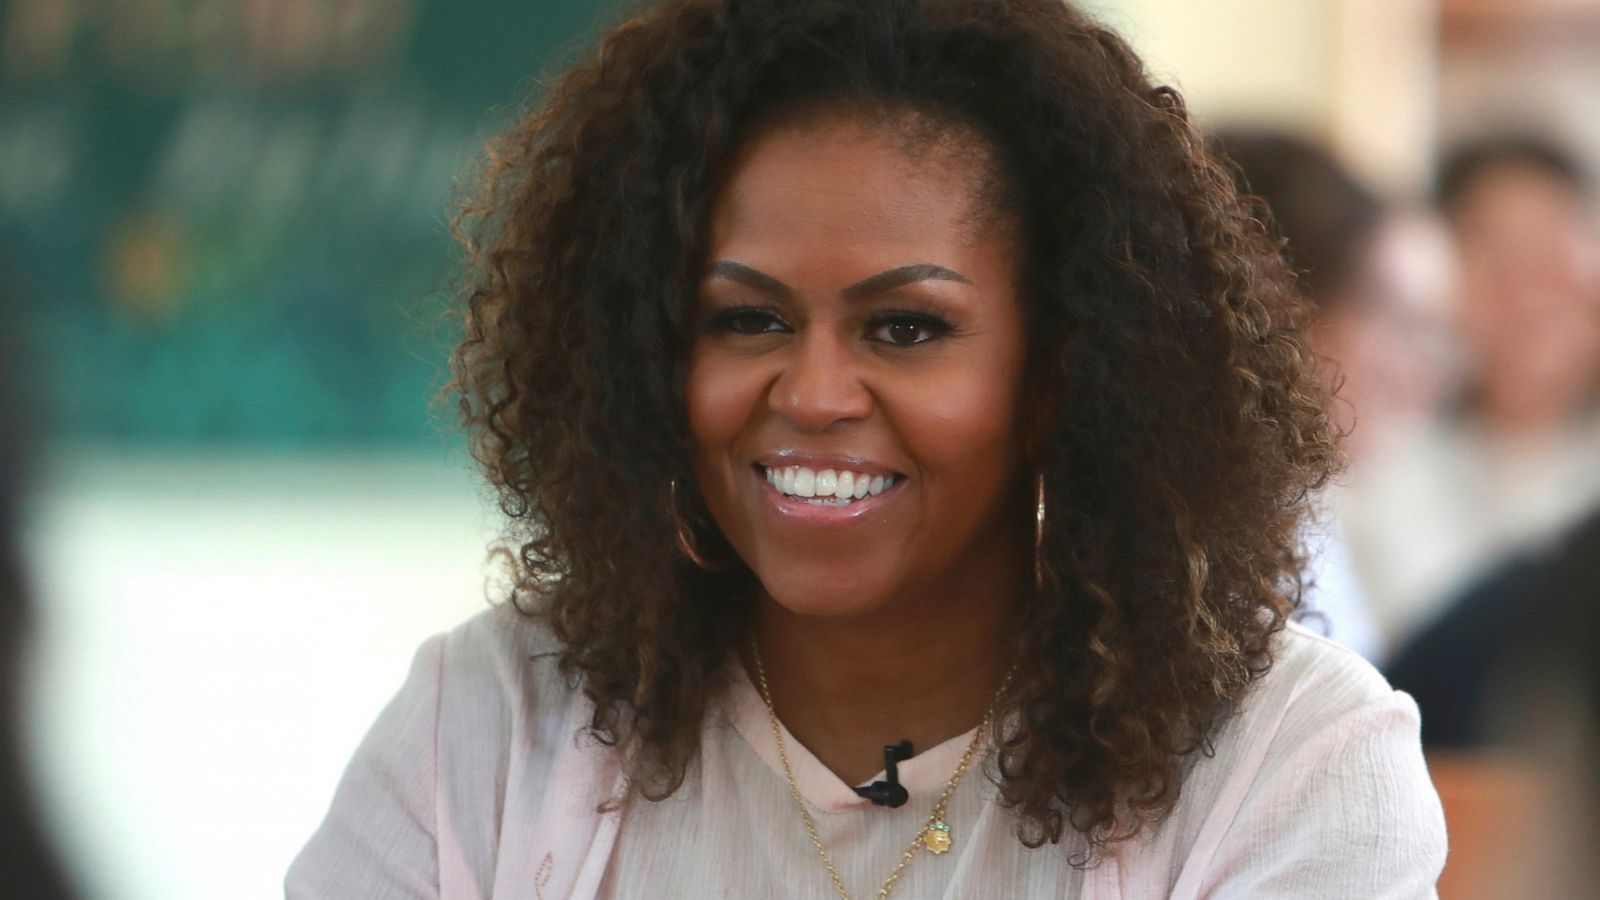 Michelle Obama documentary 'Becoming' to premiere on Netflix